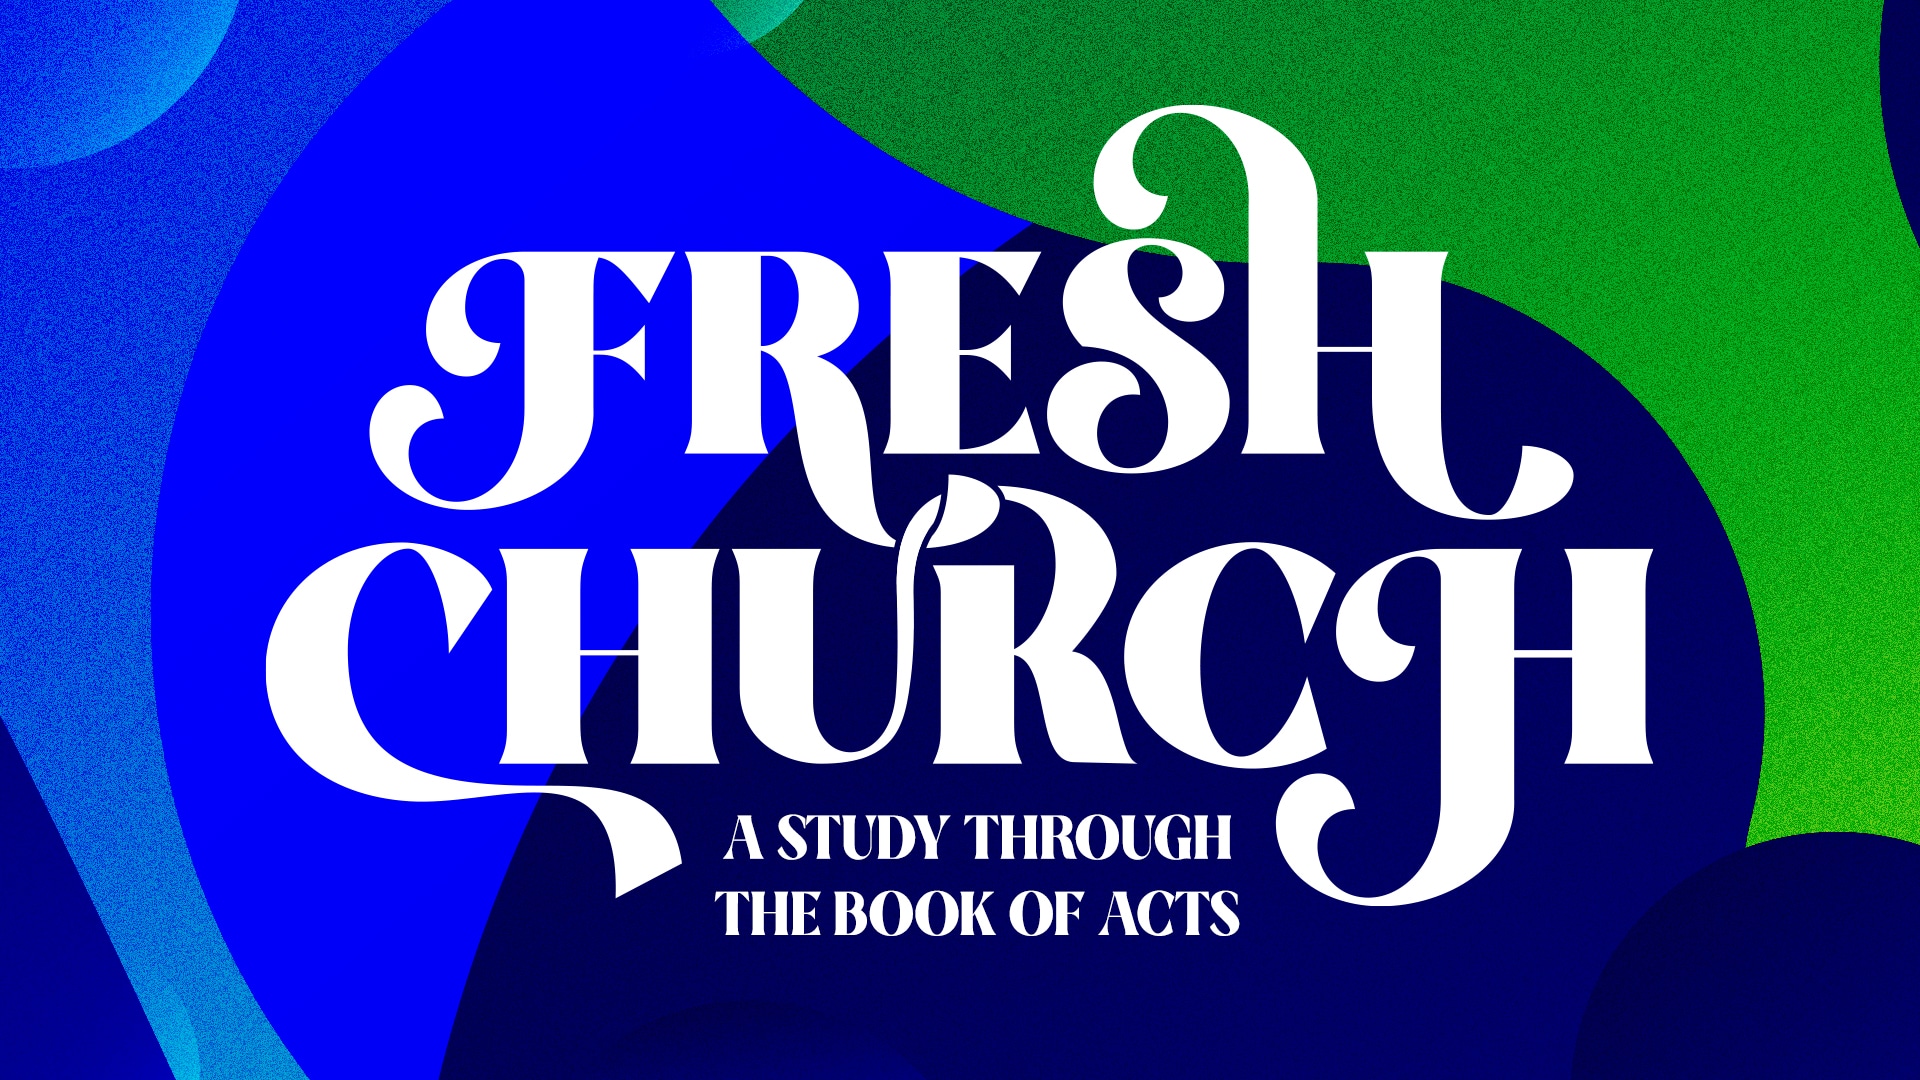 Acts 27: Paul in Crisis (Fresh Church) Image